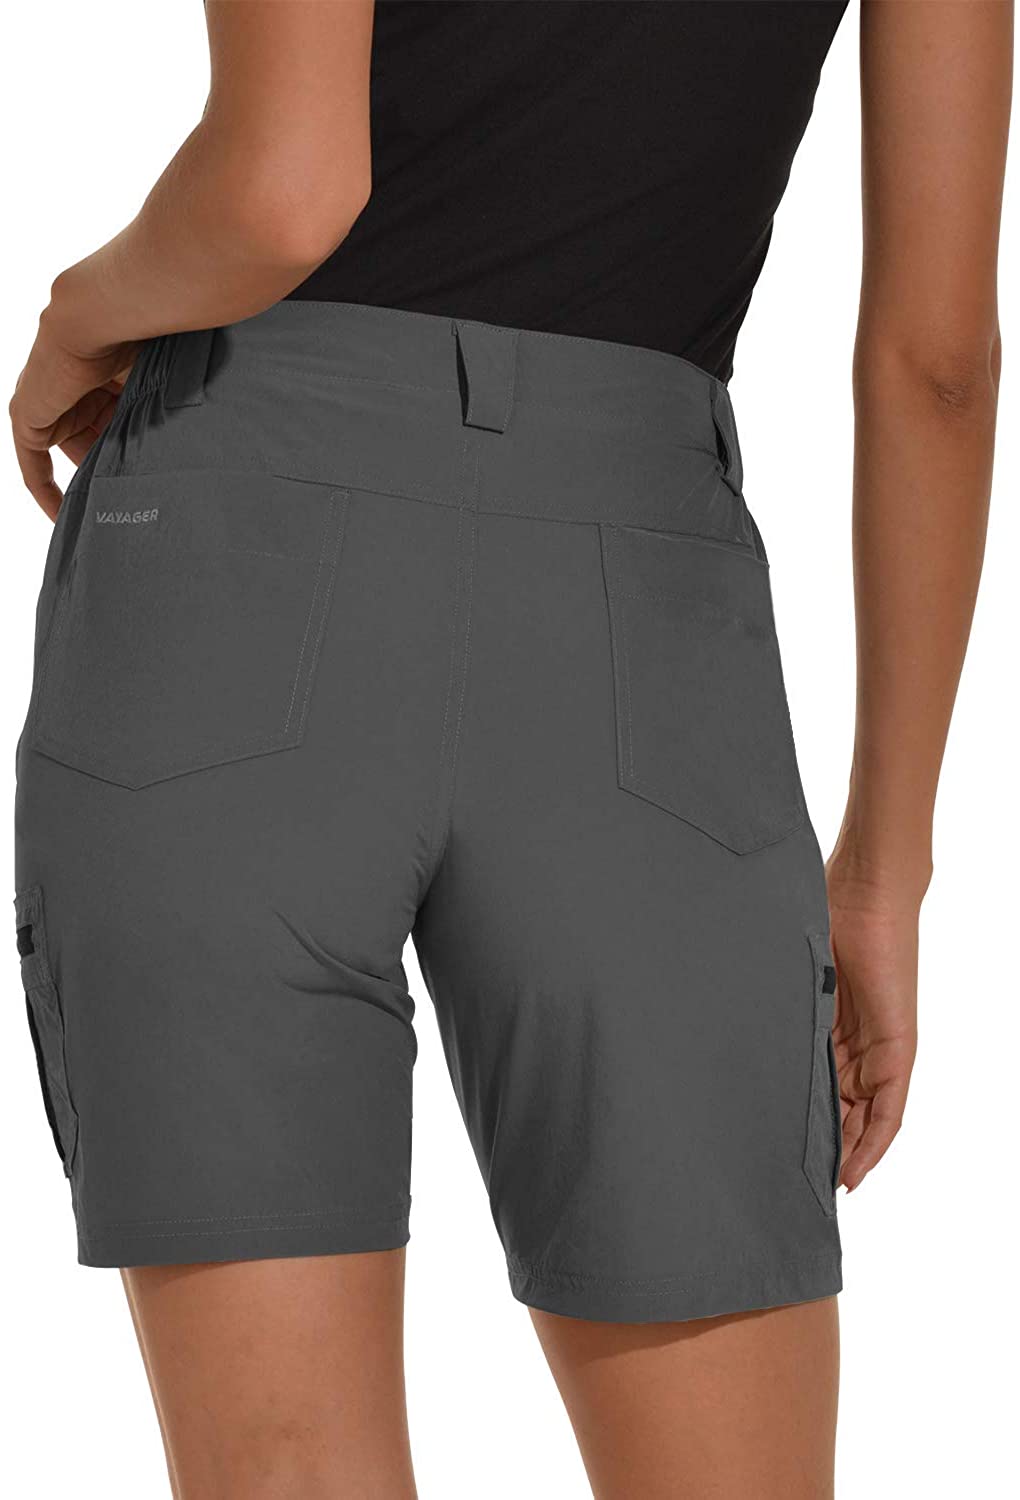 Women's Lightweight Cargo Short for Hiking,Camping and Travel with